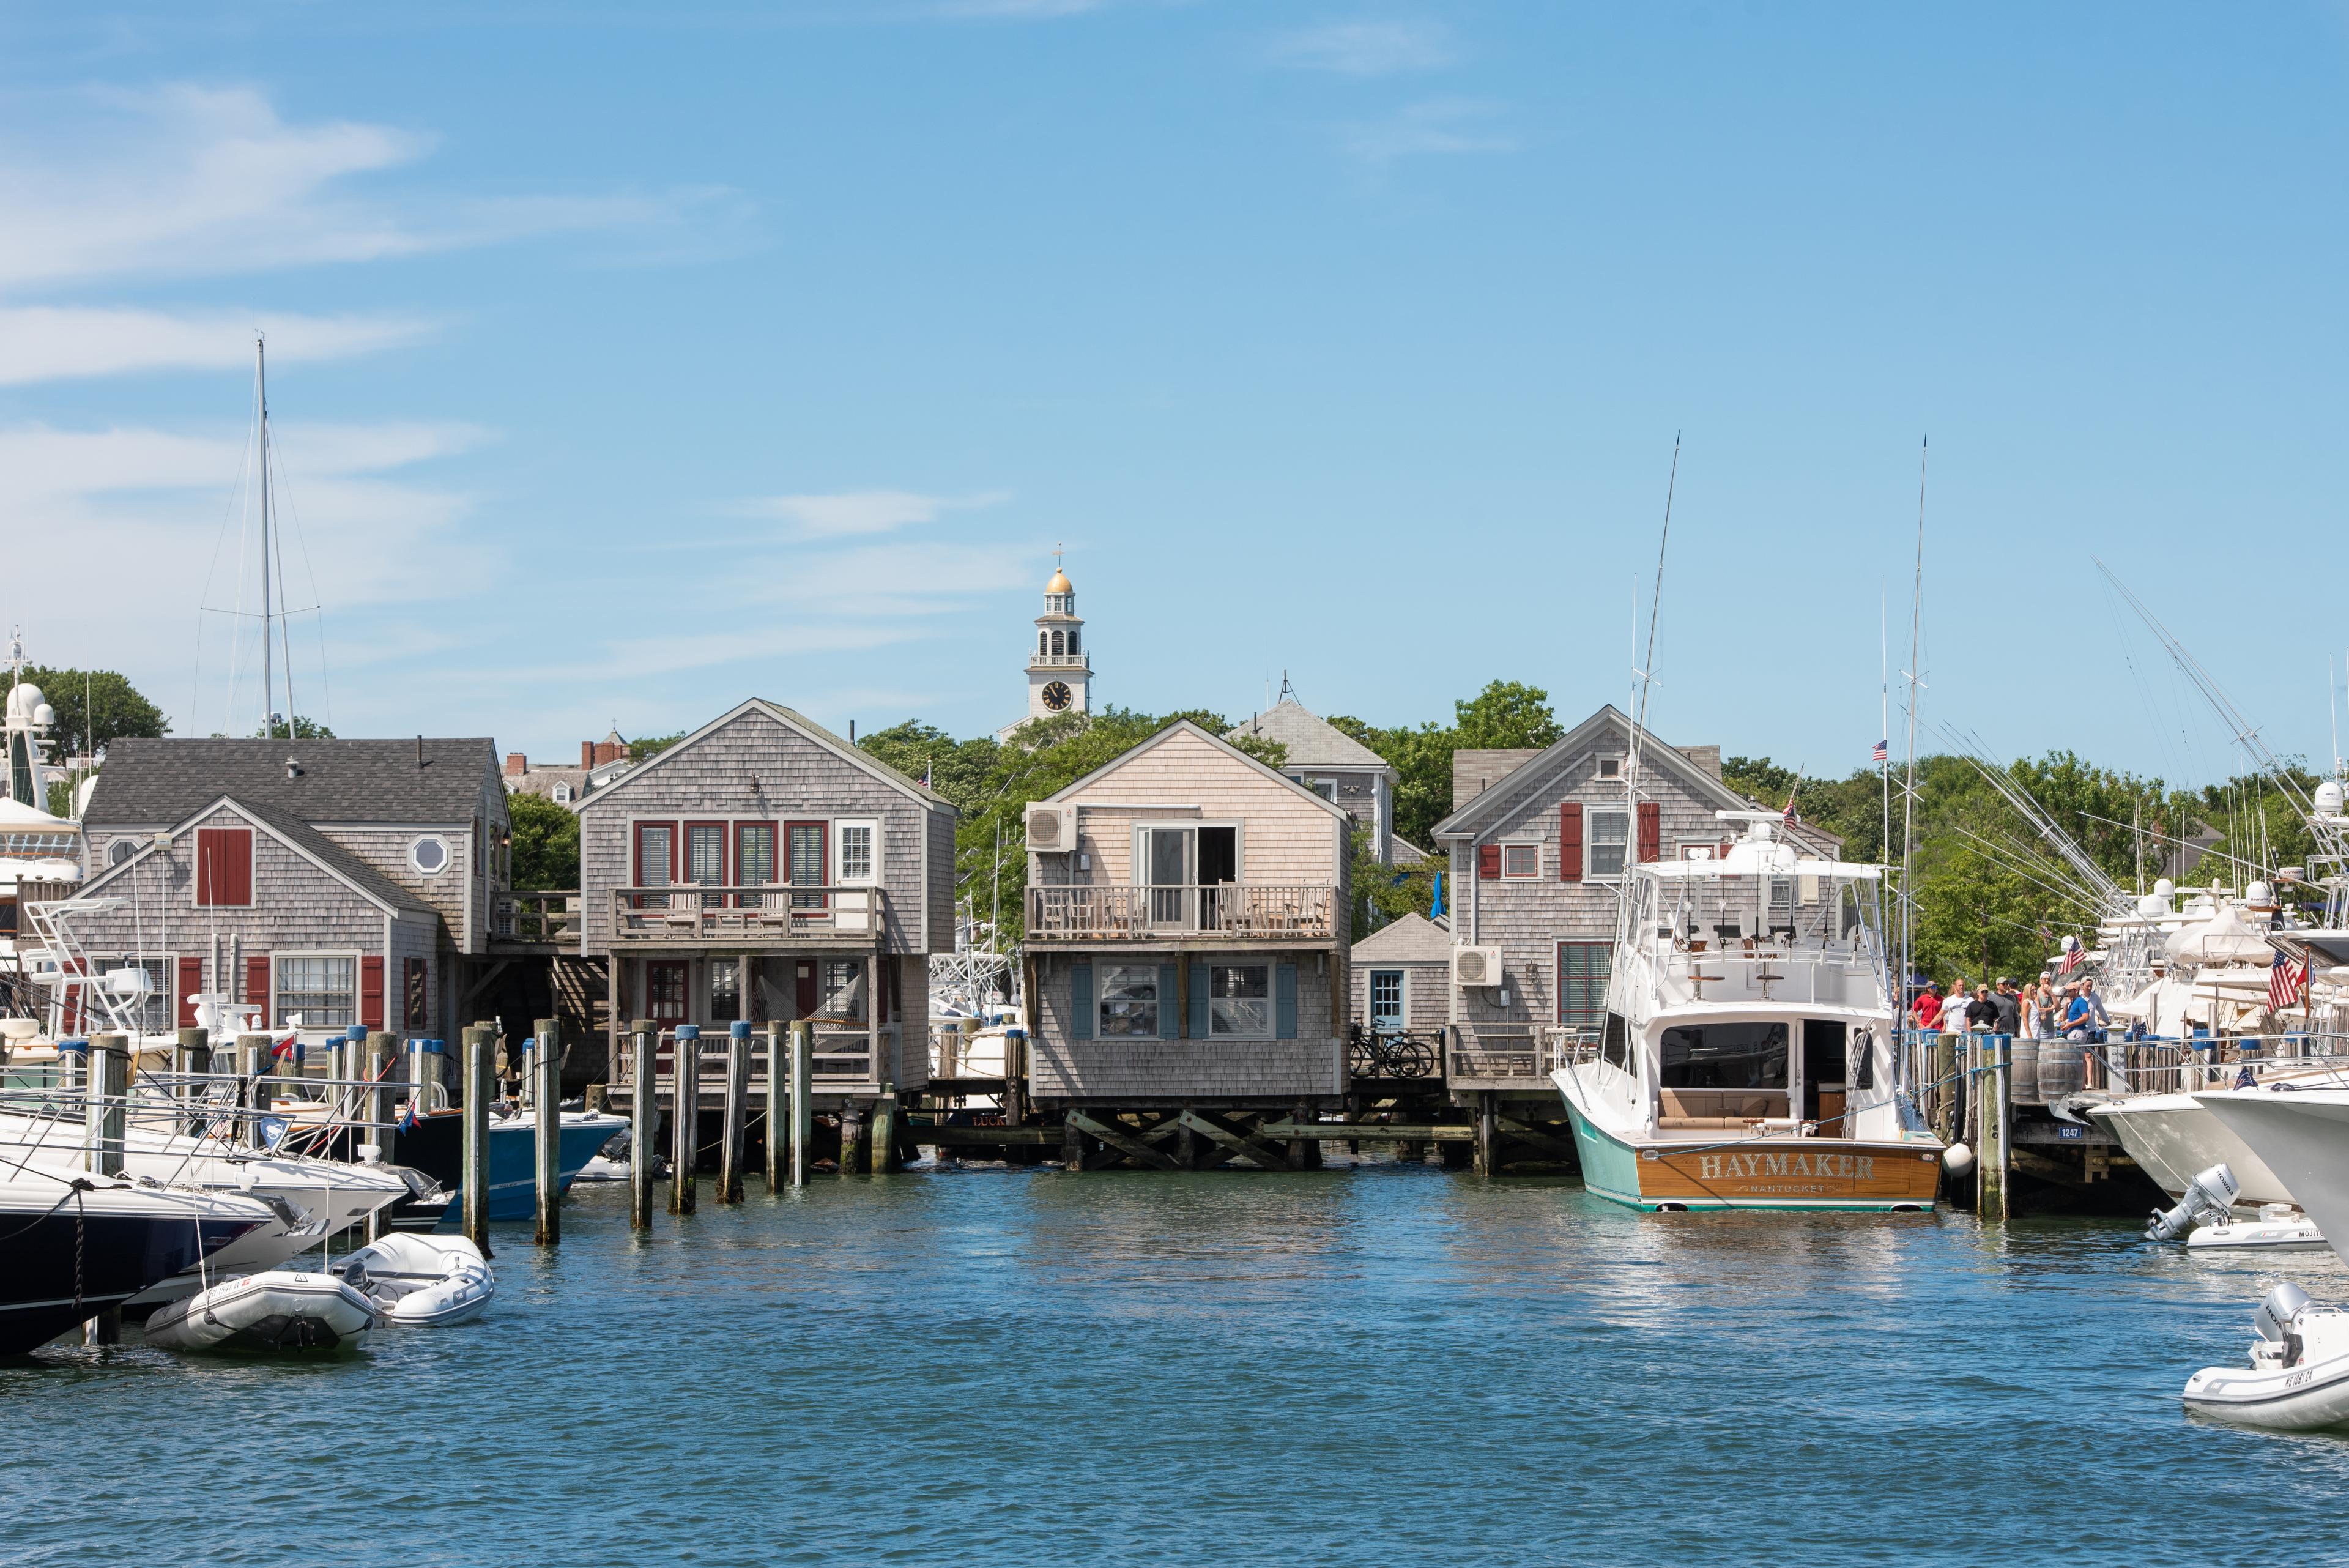 new england marina with two-story shingled buildings built on a dock with boats in foreground